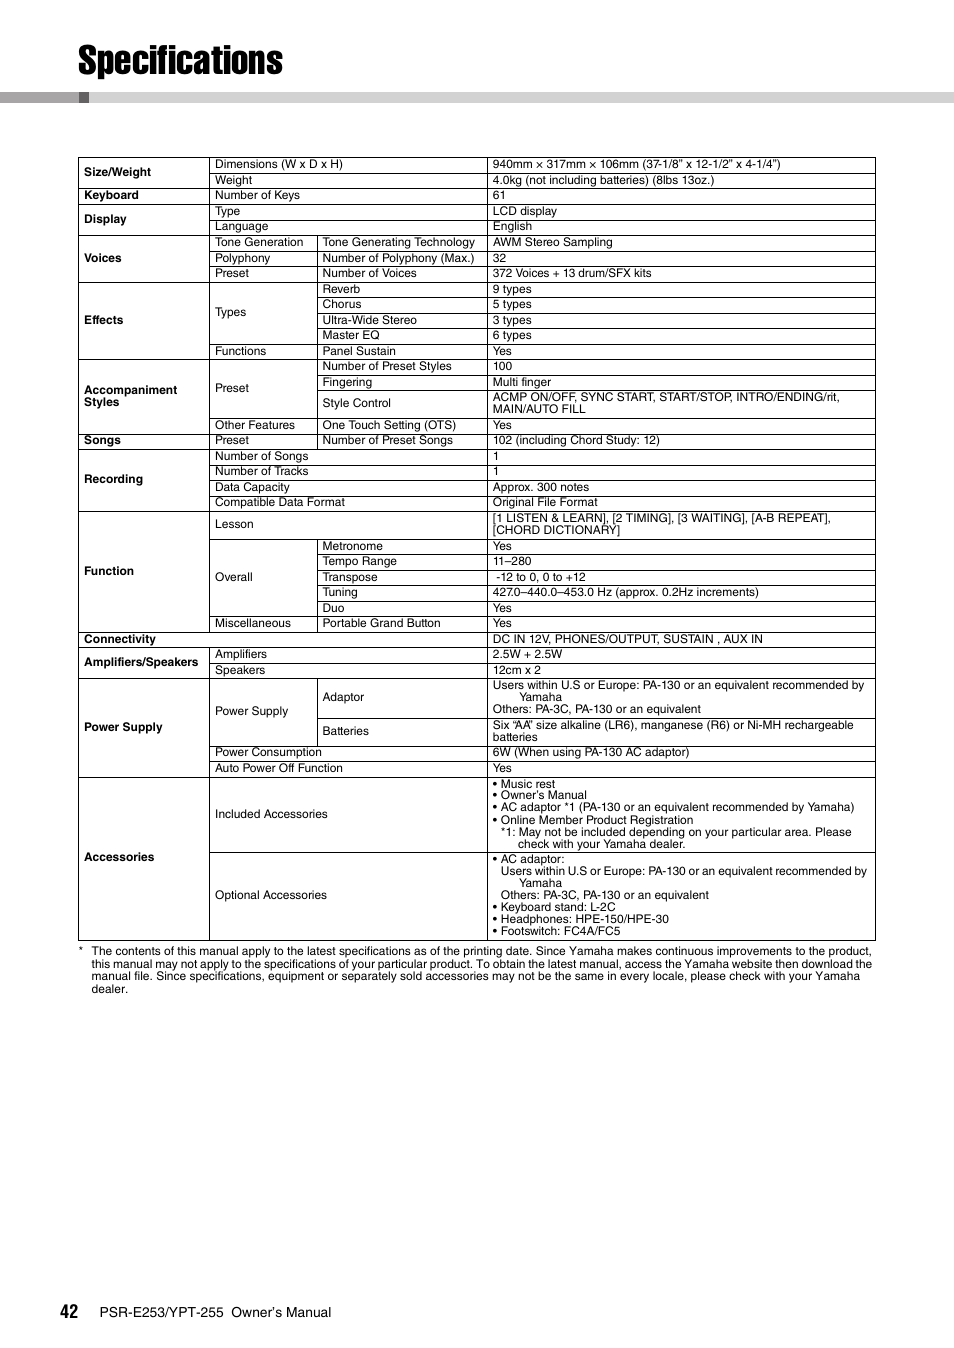 Specifications | Yamaha PSR-E253 User Manual | Page 42 / 48